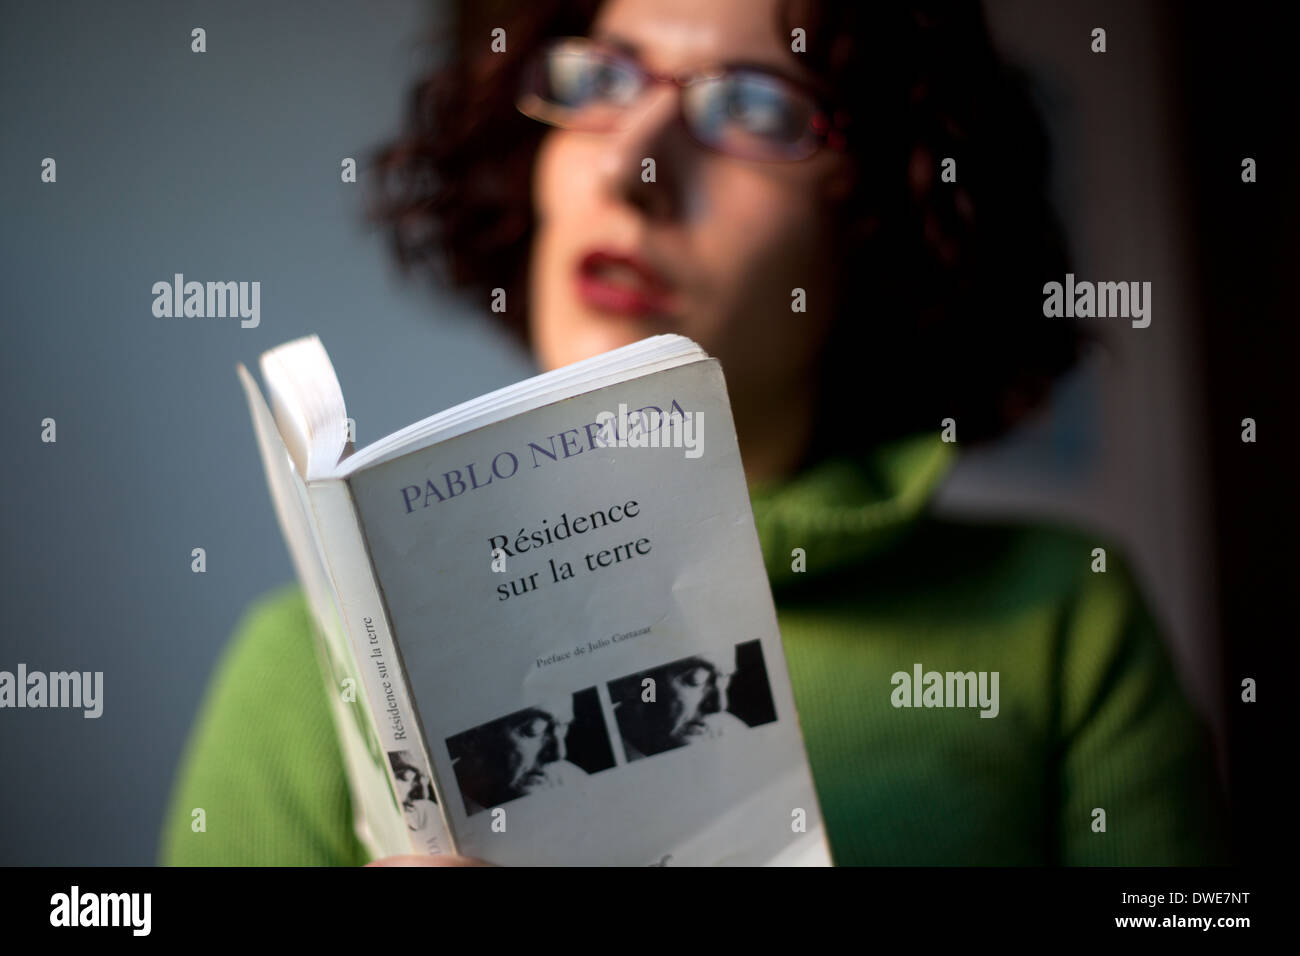 Woman reading a book. Stock Photo